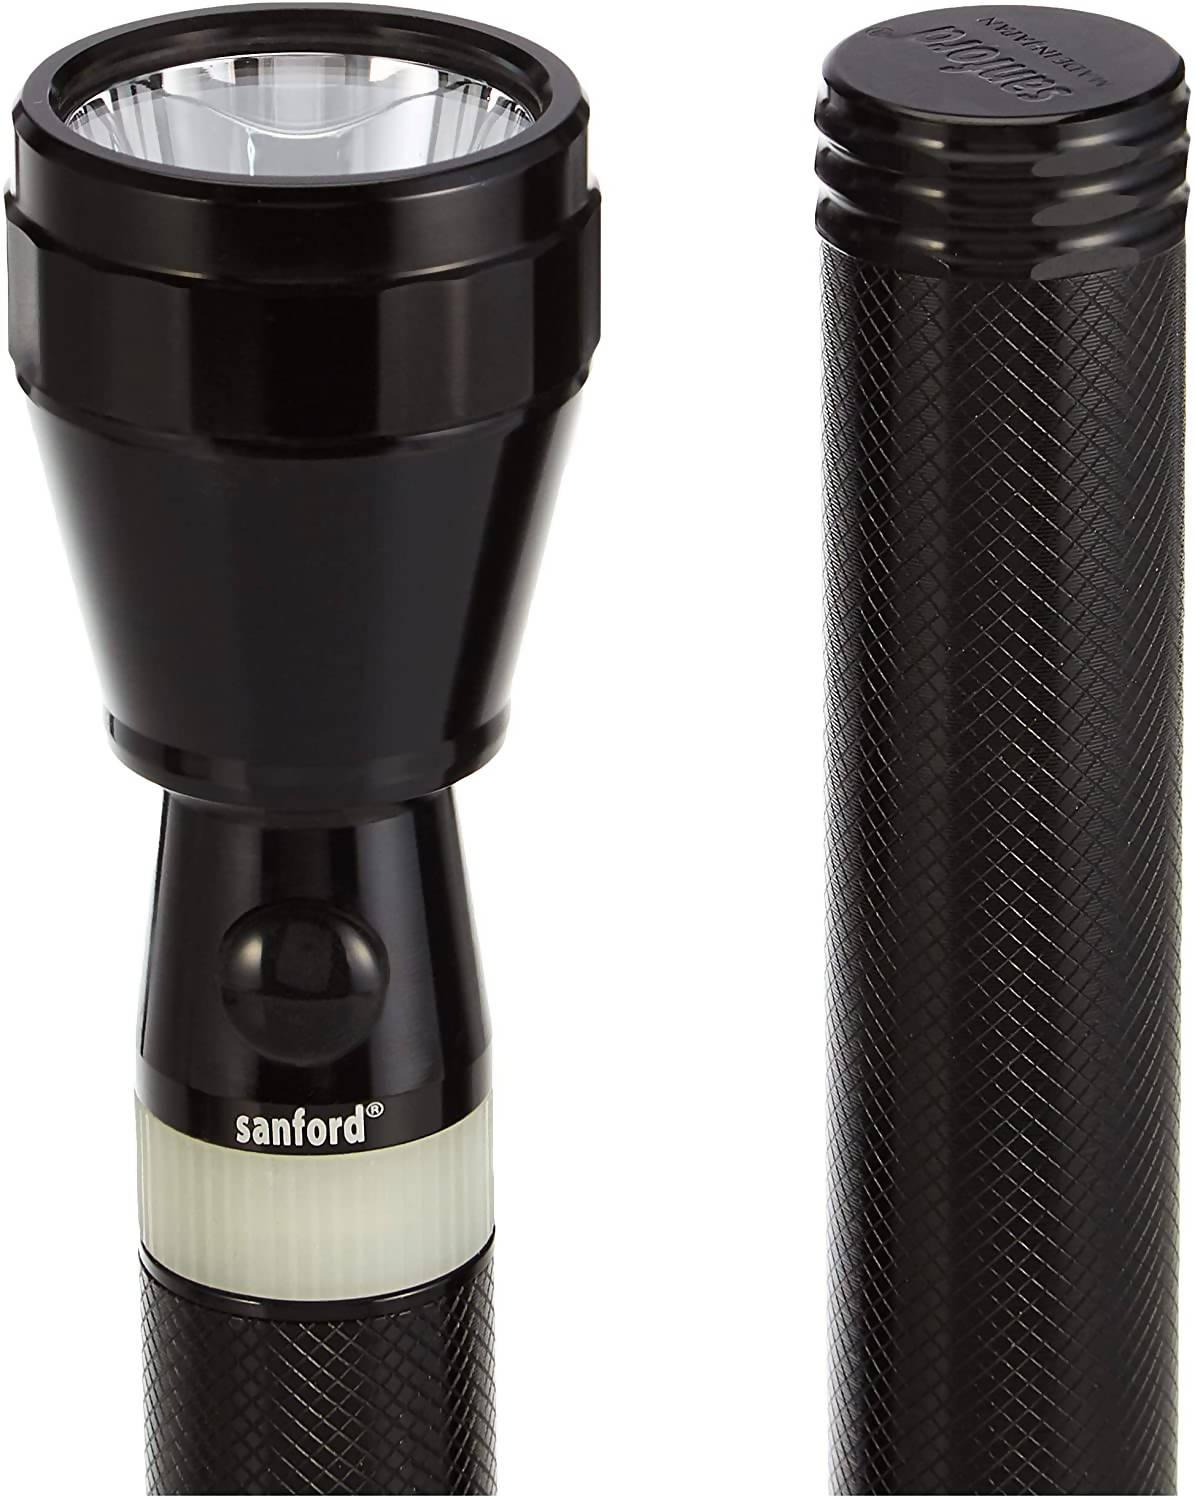 Sanford 2 In 1 Combo Rechargeable LED Flash Light Black